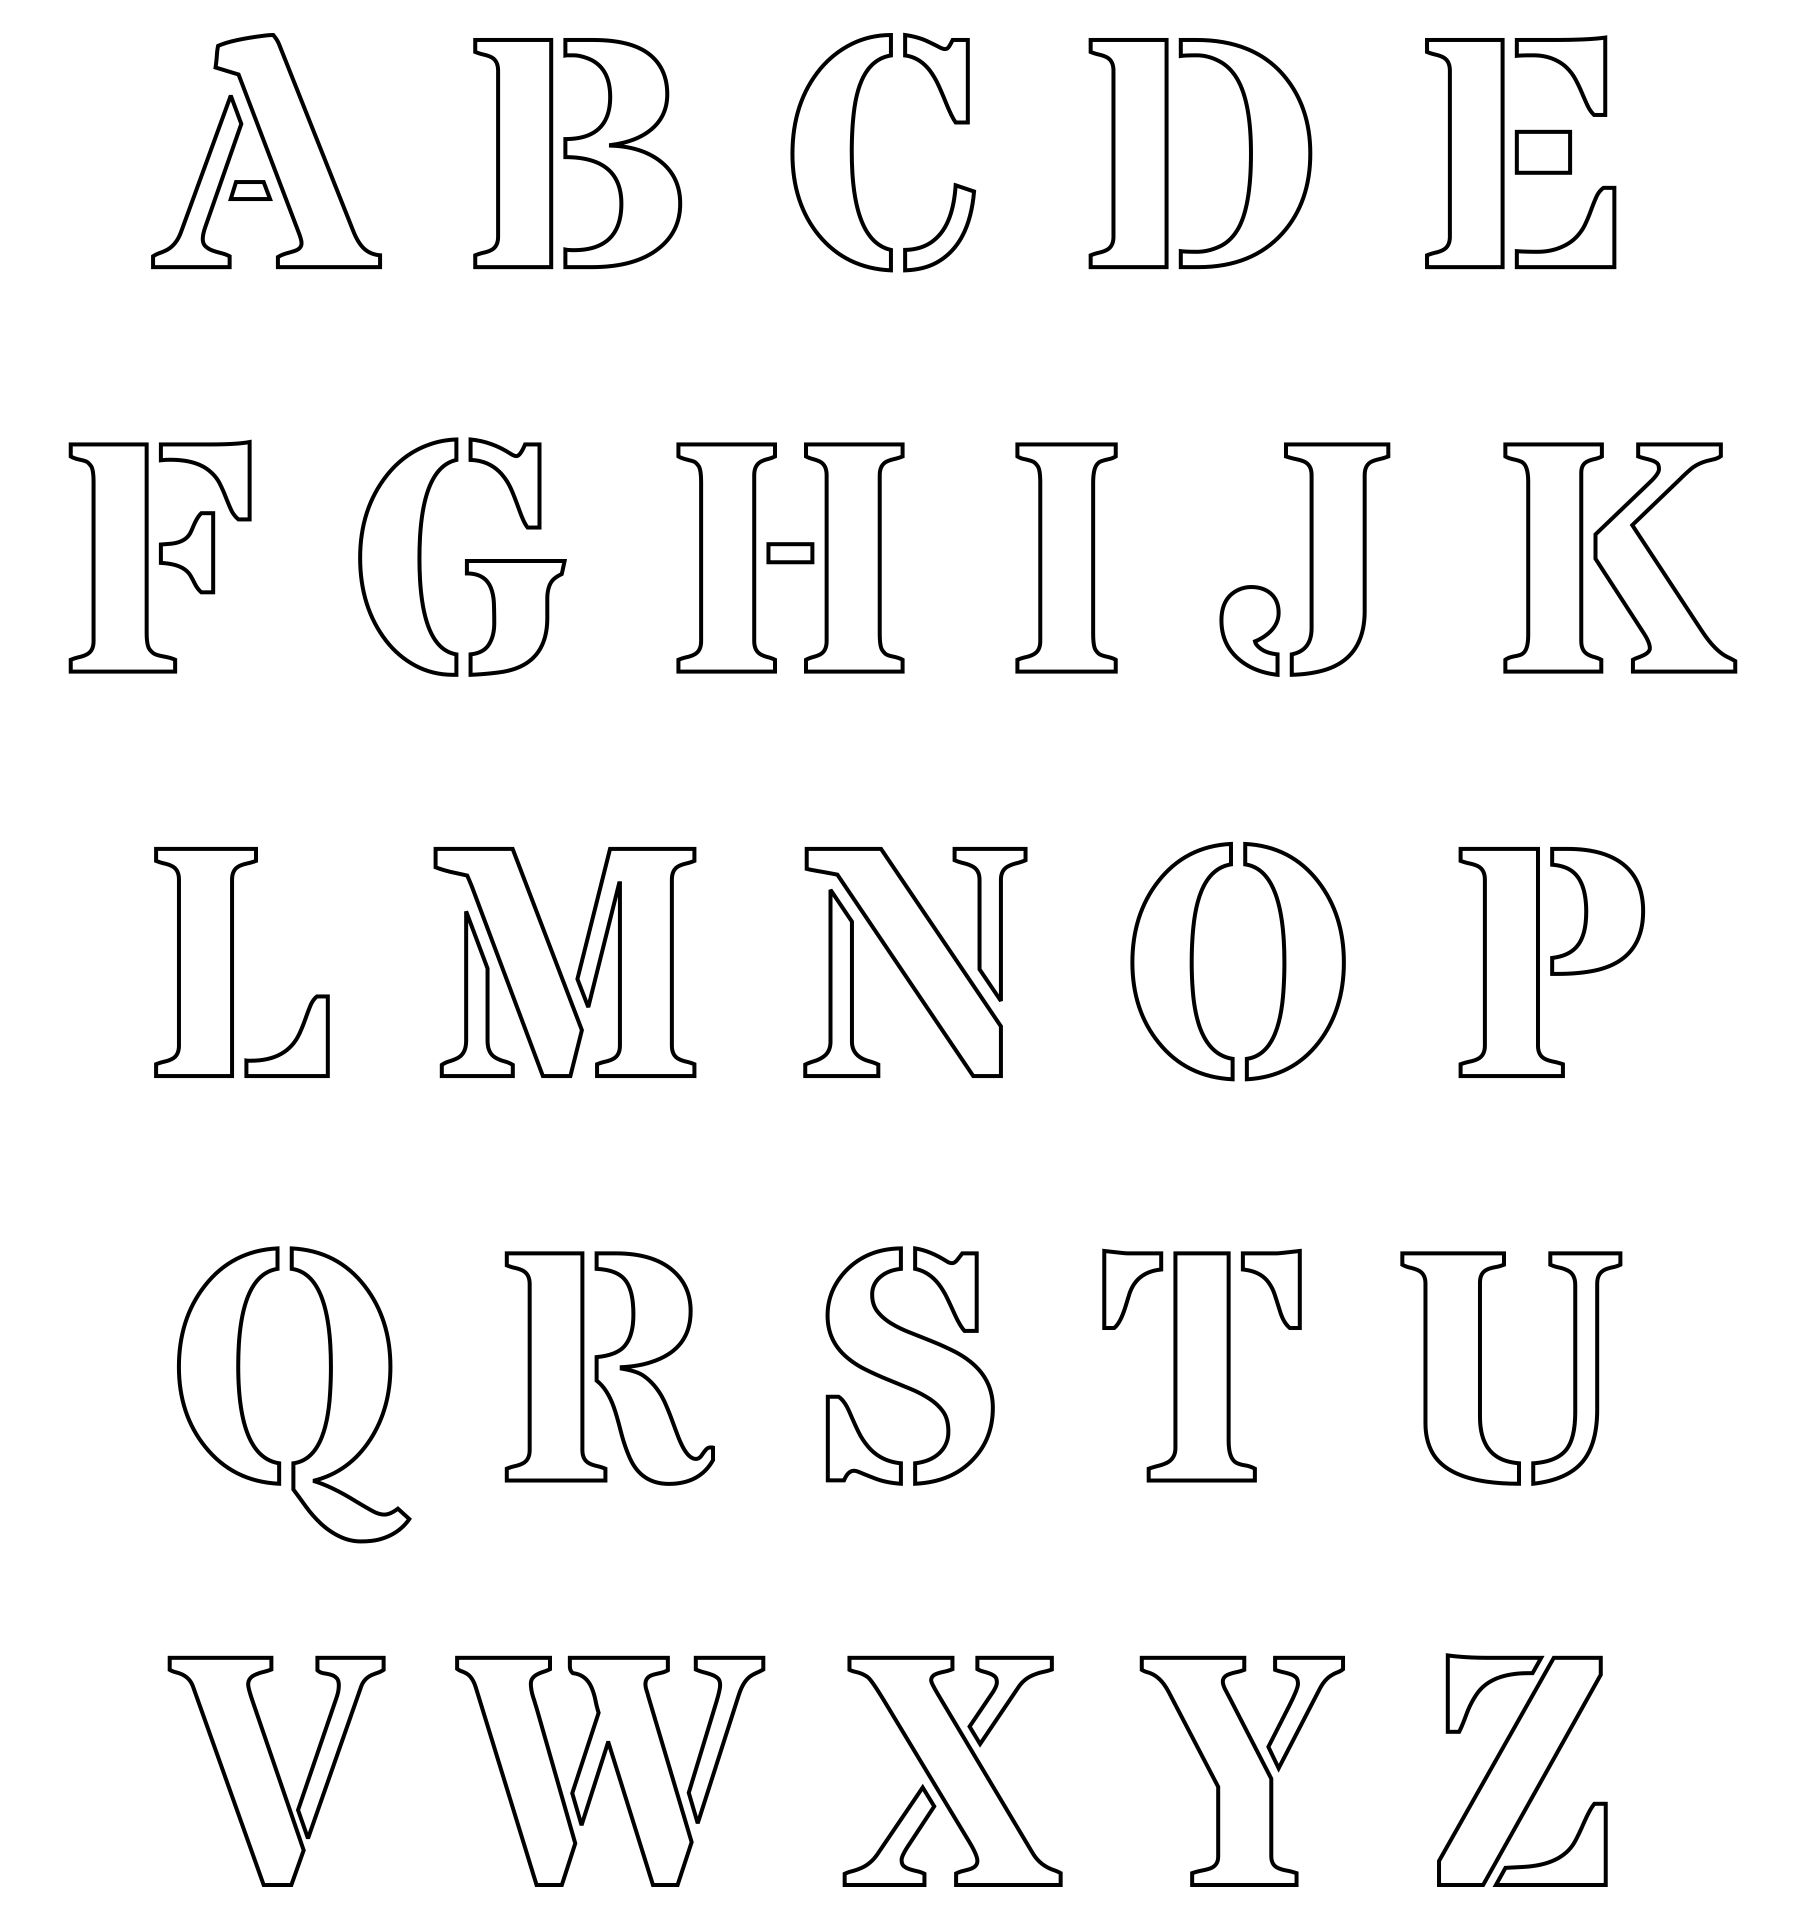 6-best-images-of-printable-cut-out-letters-free-cut-out-letters